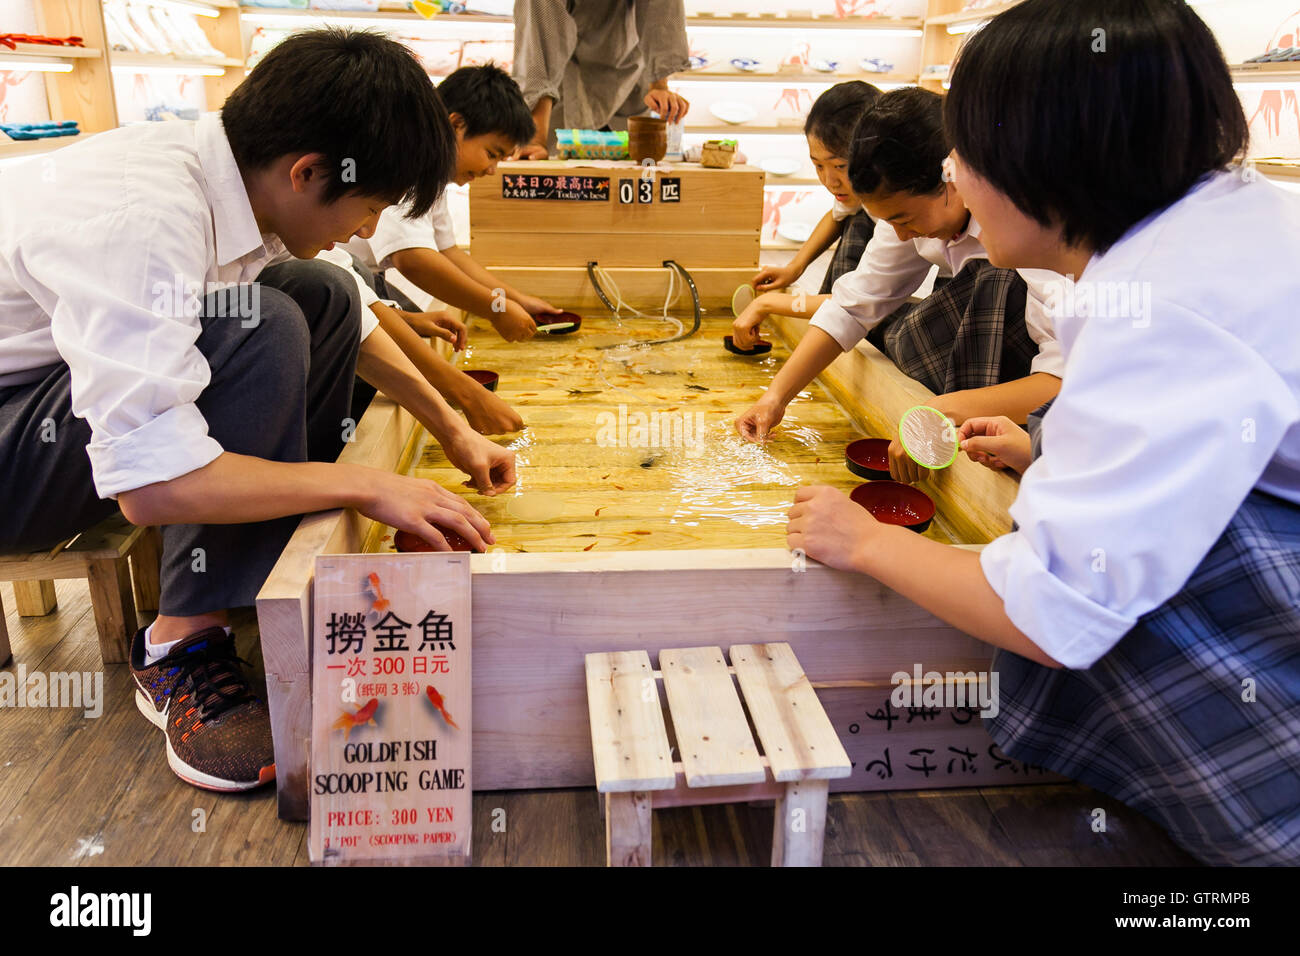 Customers try to catch small kingyo (goldfish) at the Asakusa Kingyo store  on September 9, 2016, Tokyo, Japan. Asakusa Kingyo is a goldfish concept  store where customers can buy various kinds of